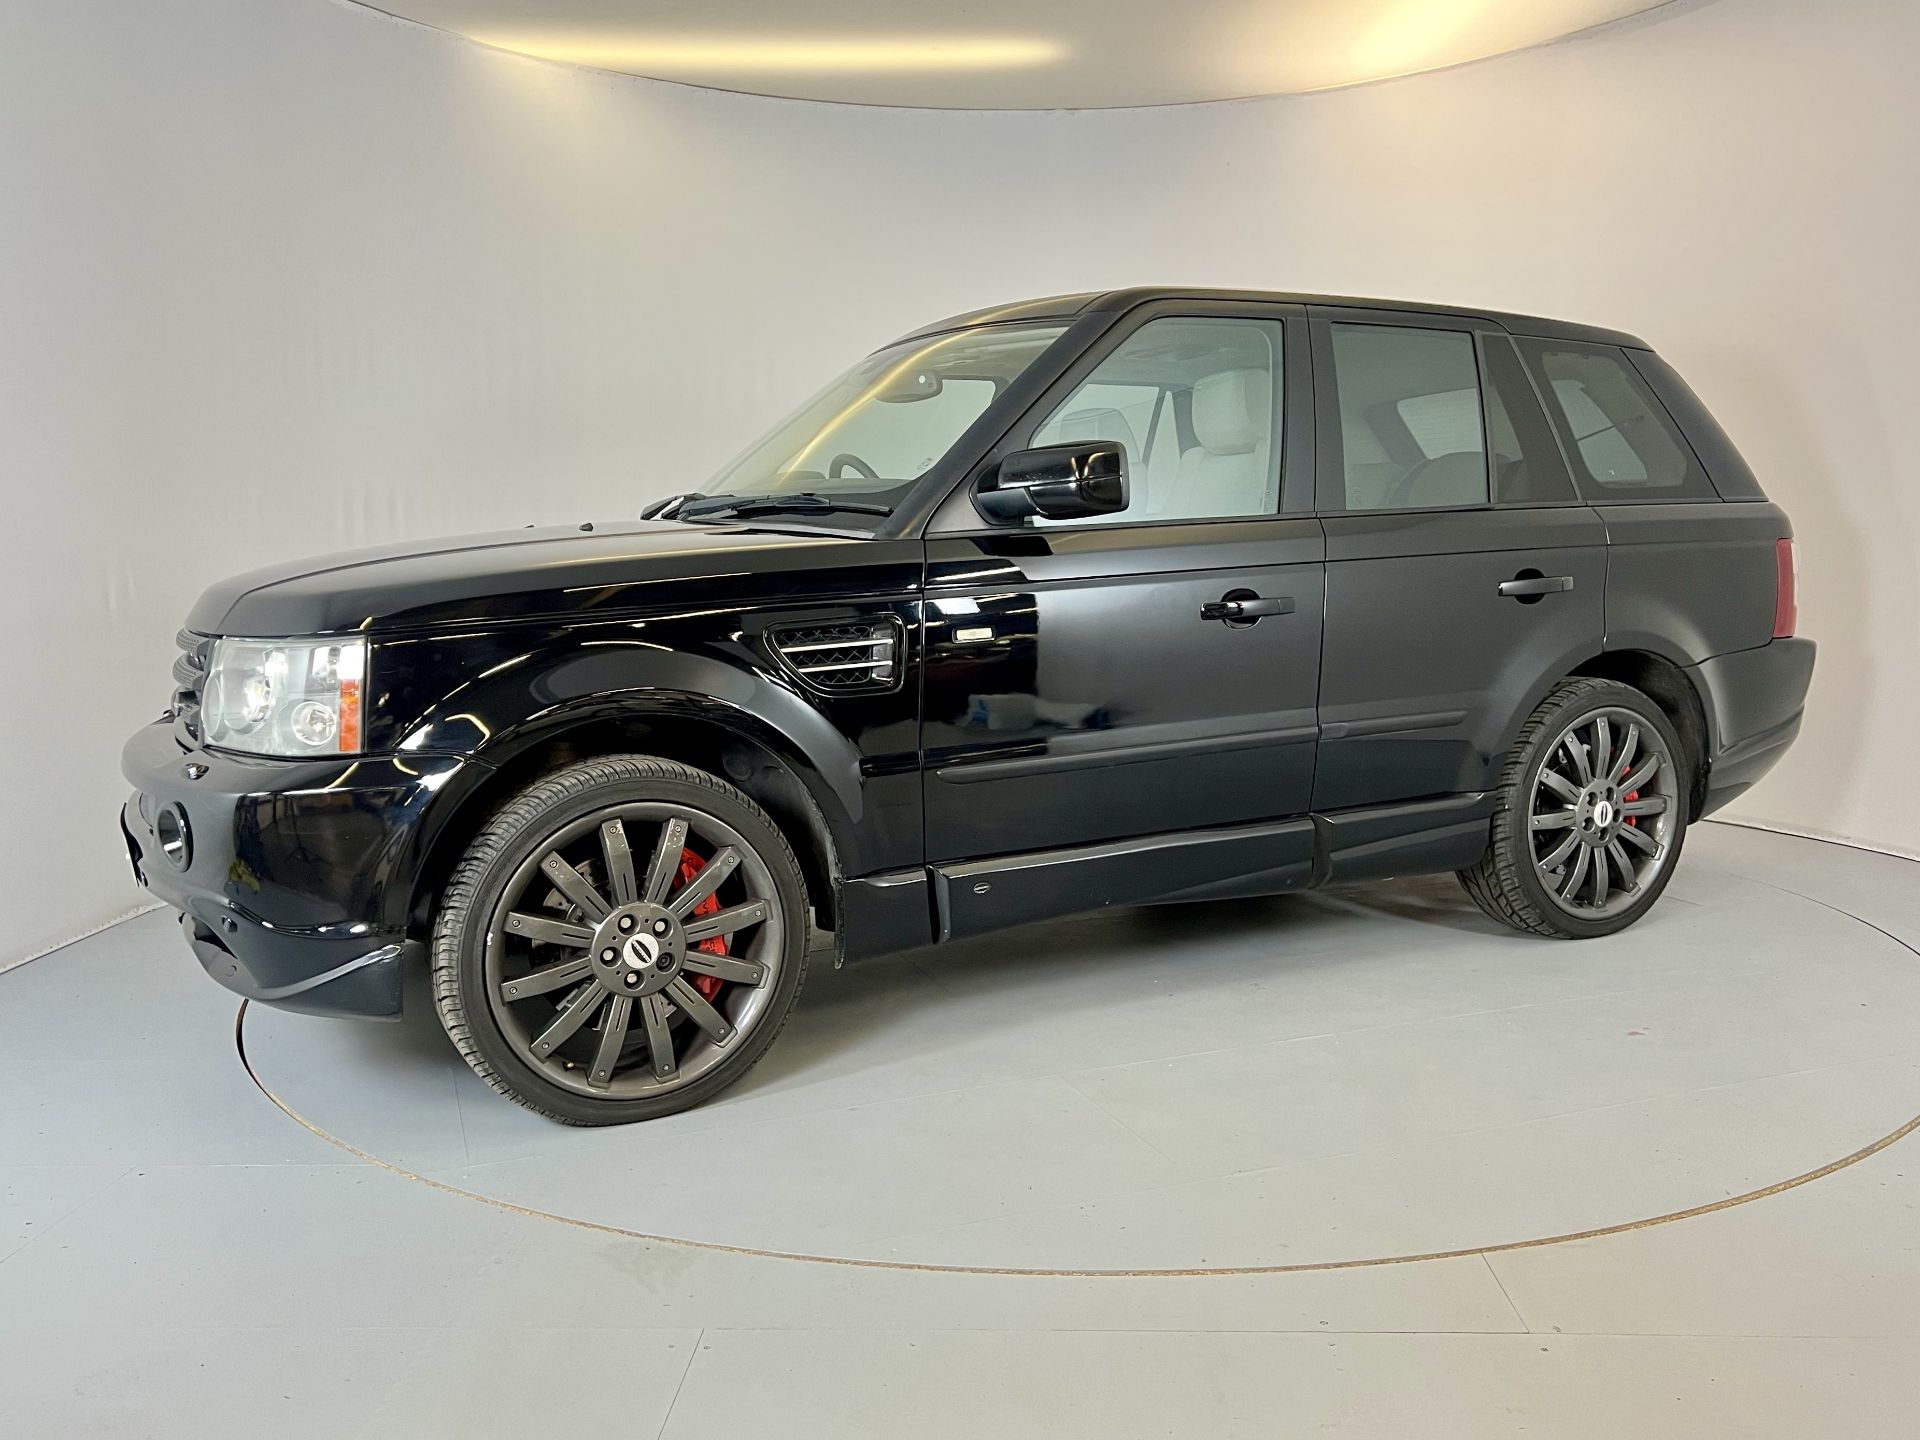 Range Rover Sport 1st Edition 4.2 Supercharged OverFinch - Image 4 of 33